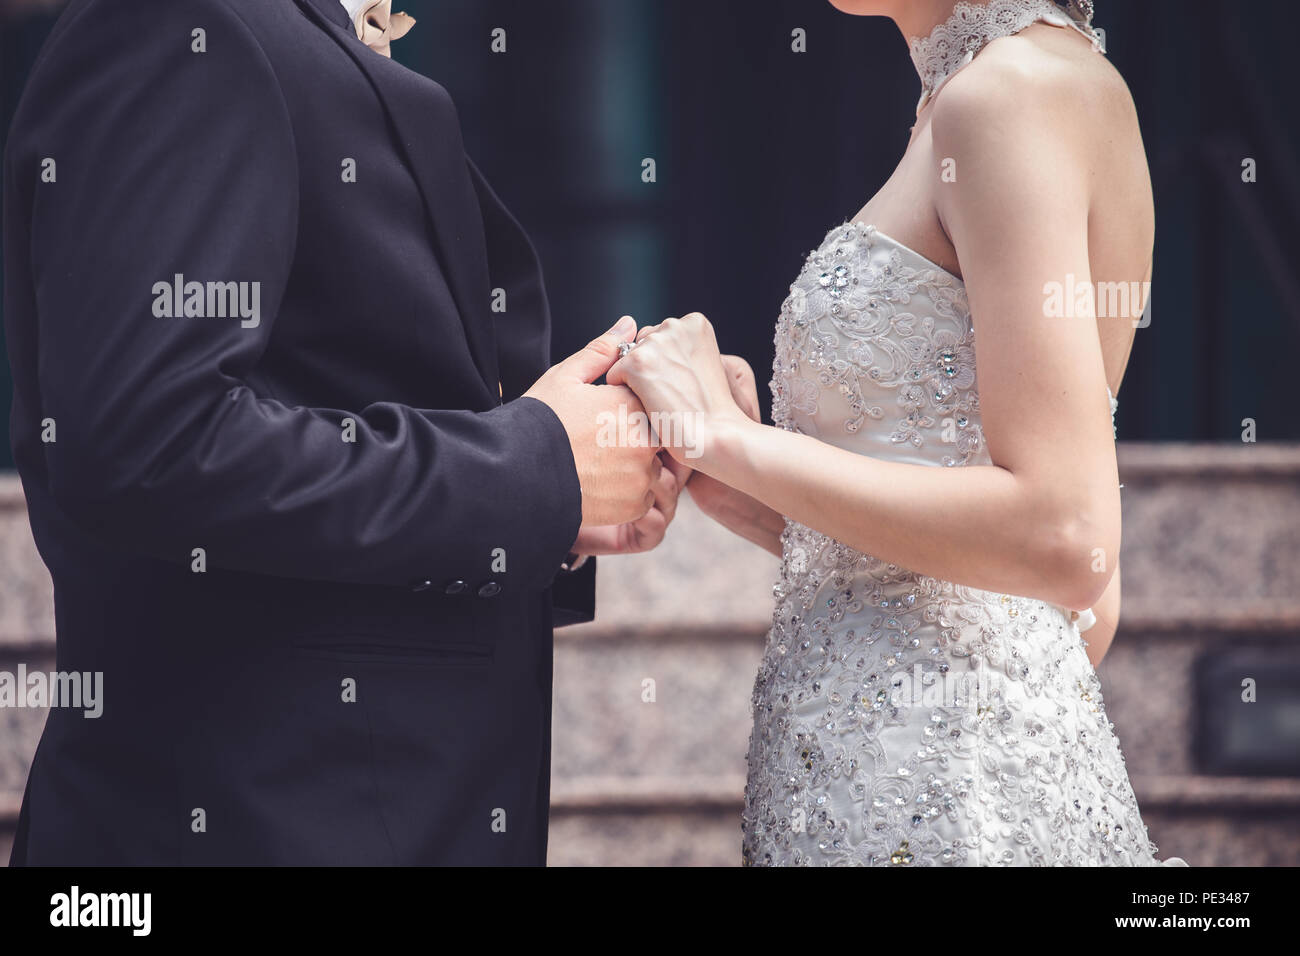 Wedding couple holding hands a symbol of love and marriage. Stock Photo